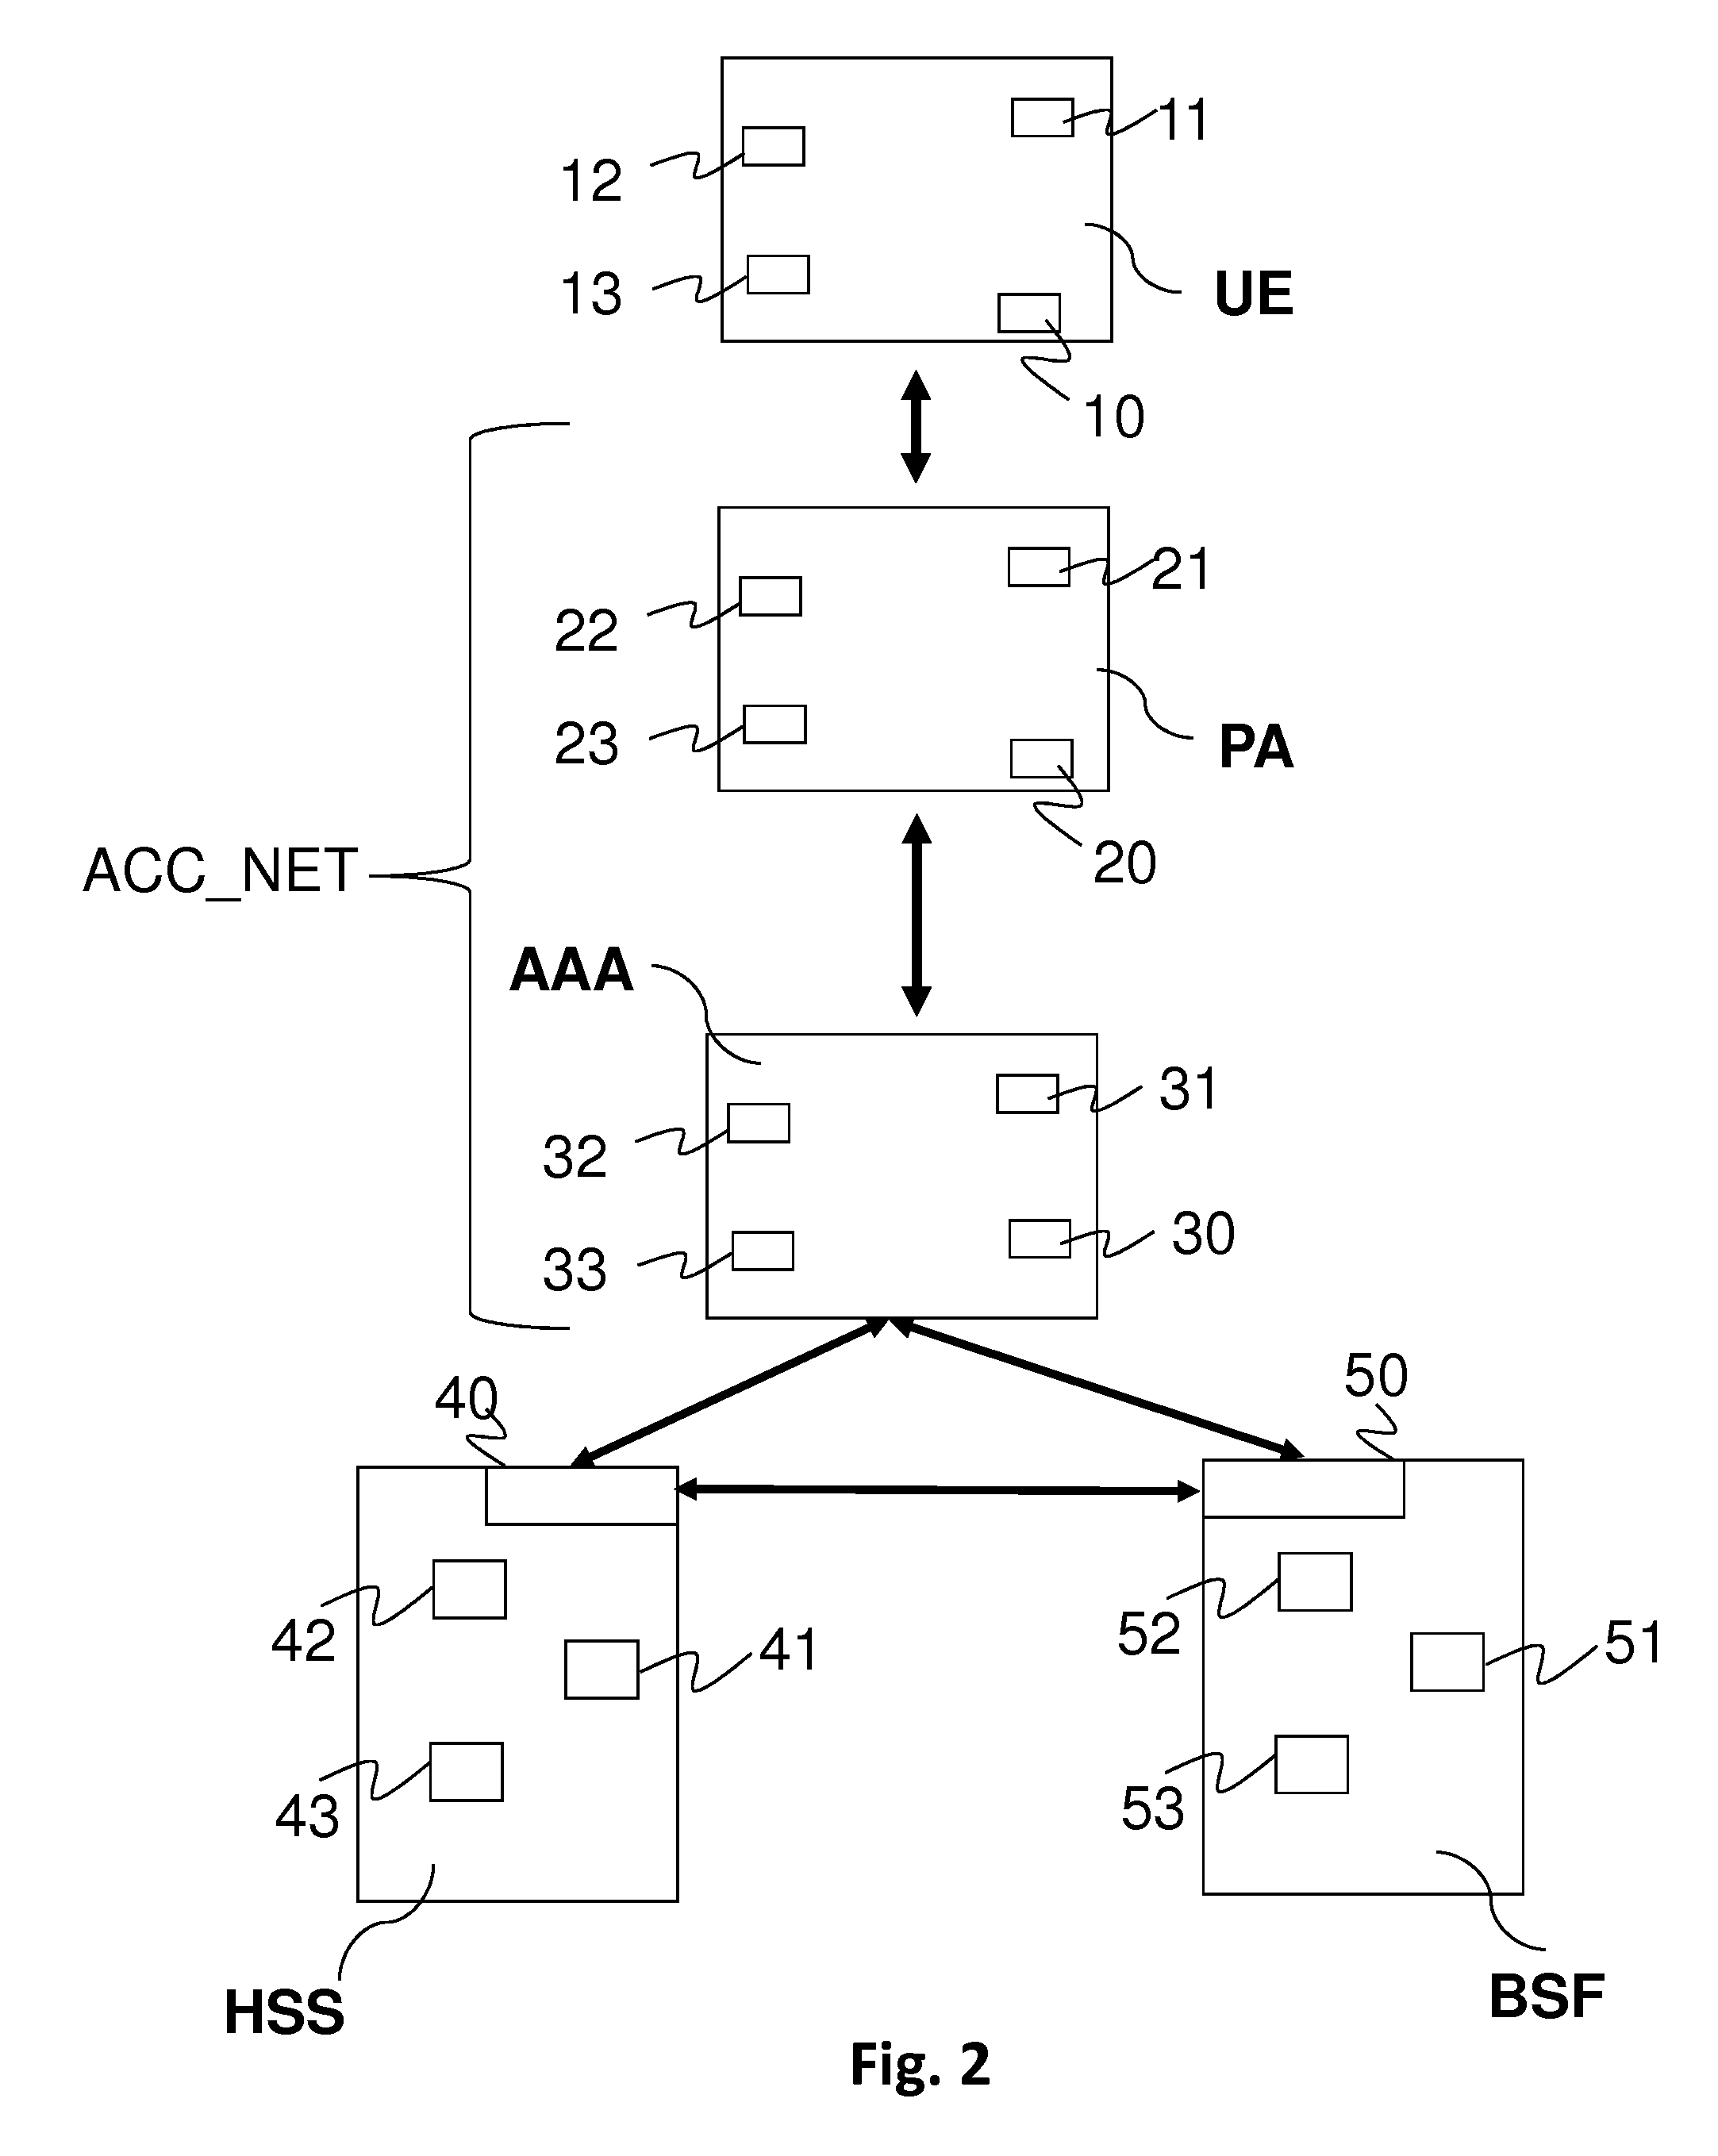 Implementing a Security Association During the Attachment of a Terminal to an Access Network